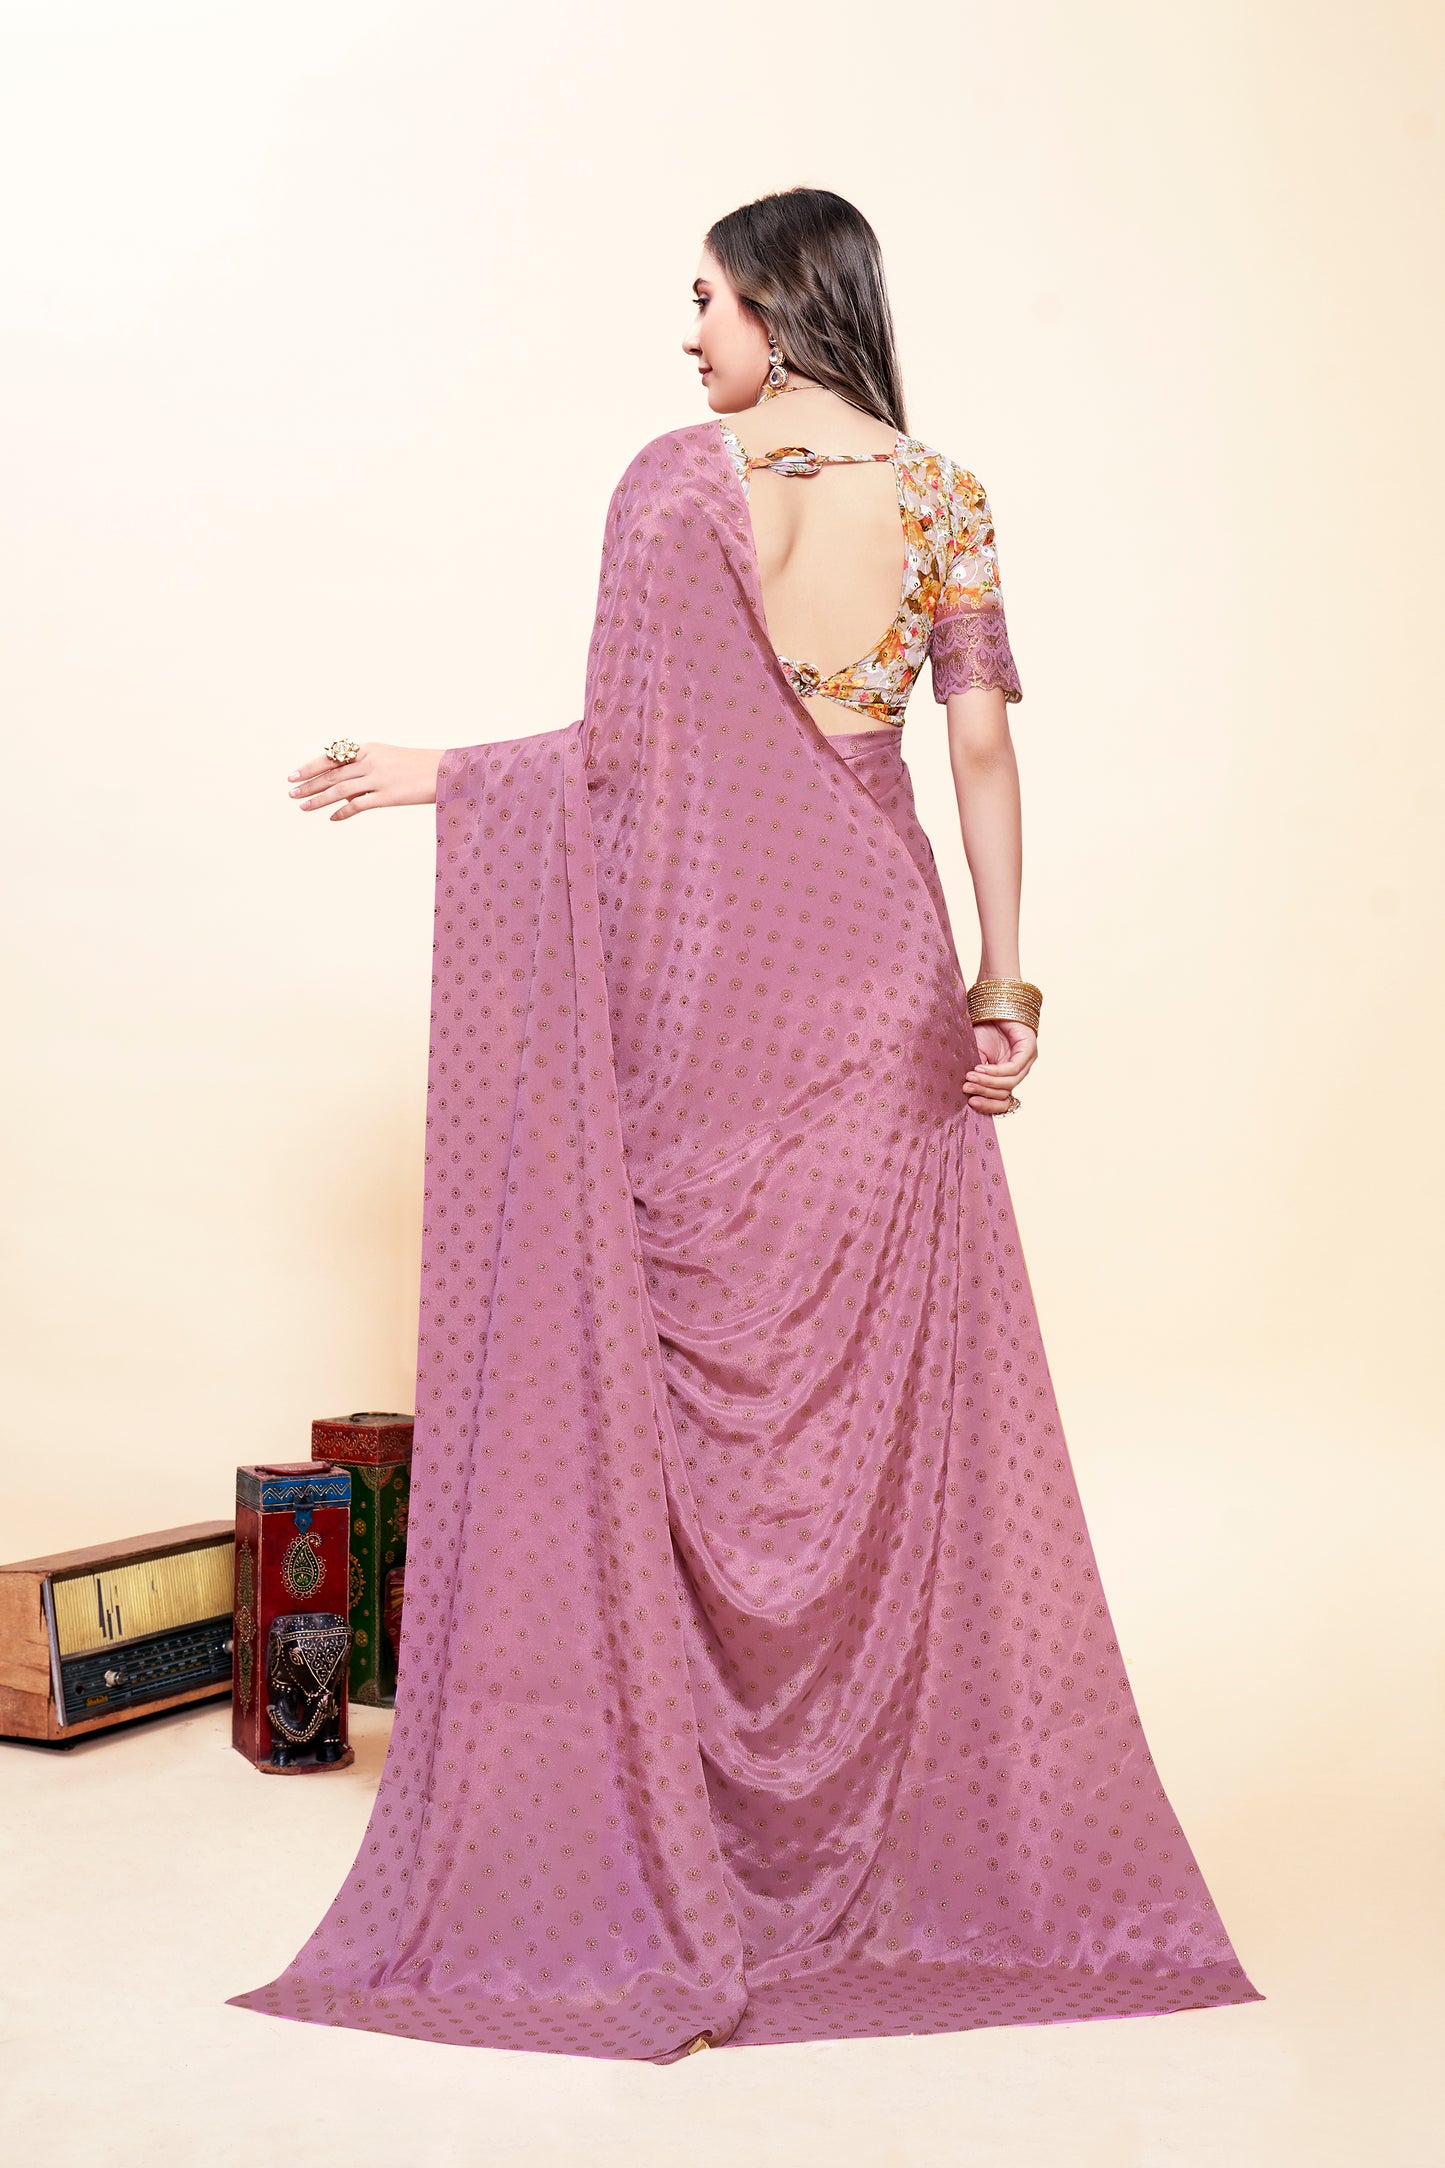 Vande Bharat Multicolor Saree with Digital Printed Blouse and Best Selling Saree Design